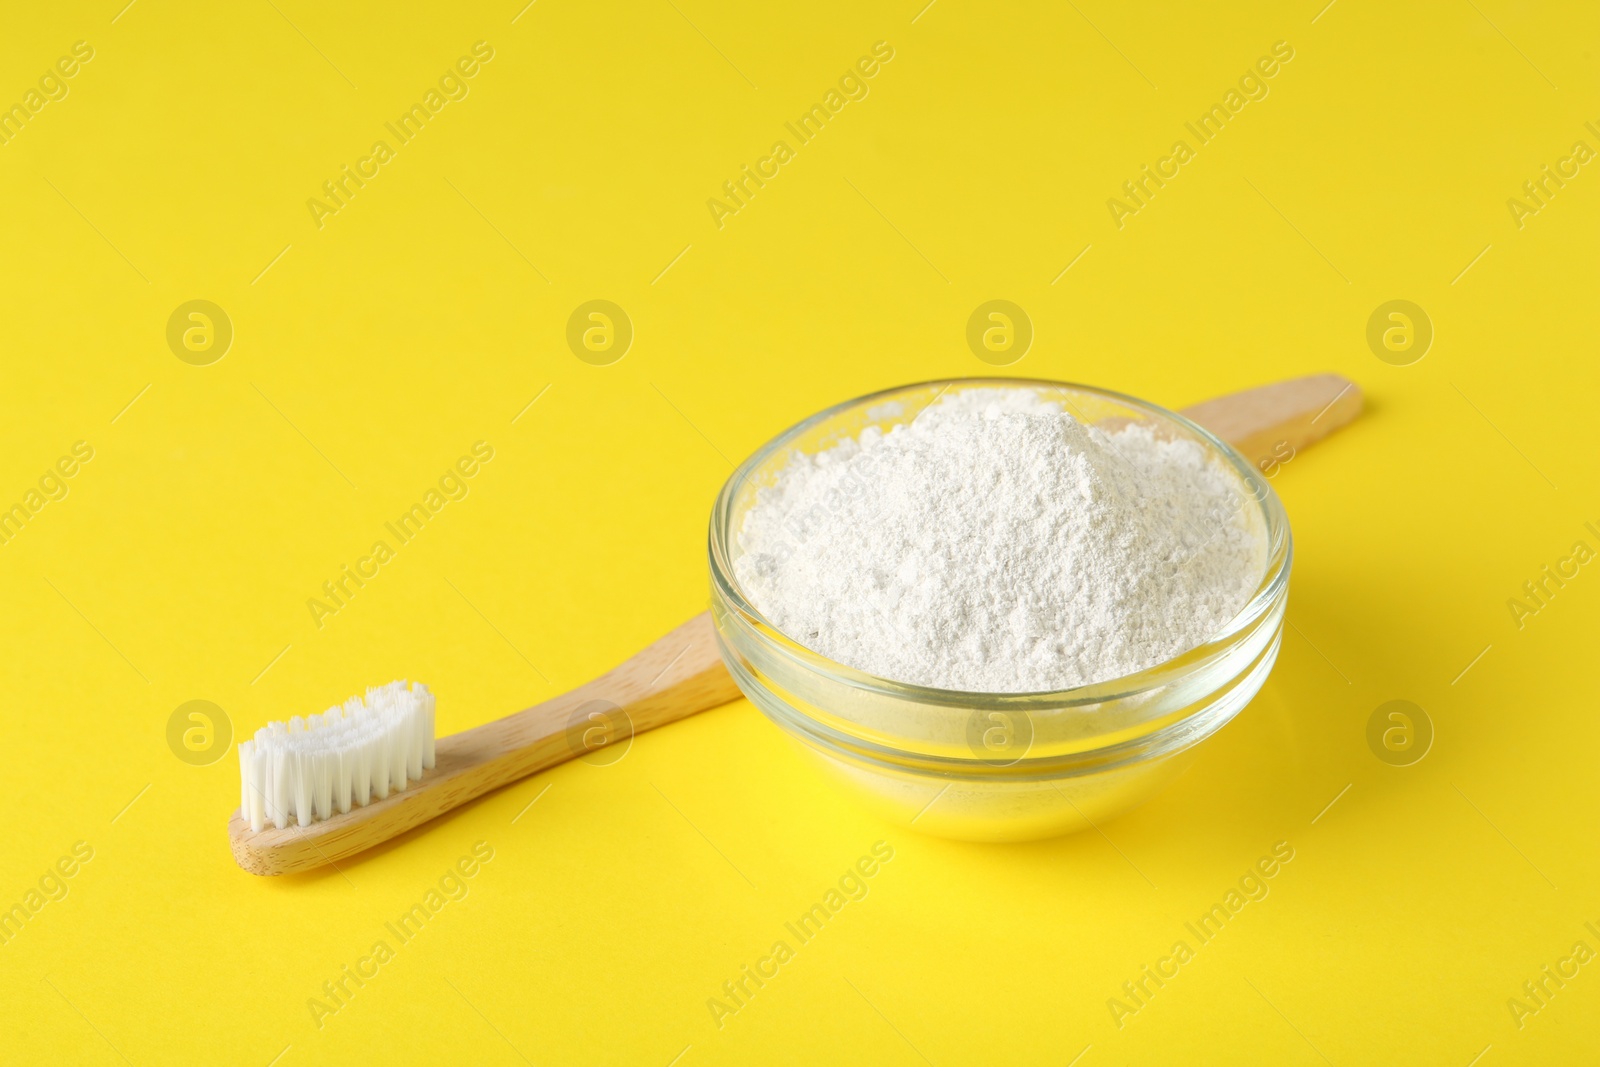 Photo of Bowl of tooth powder and brush on yellow background